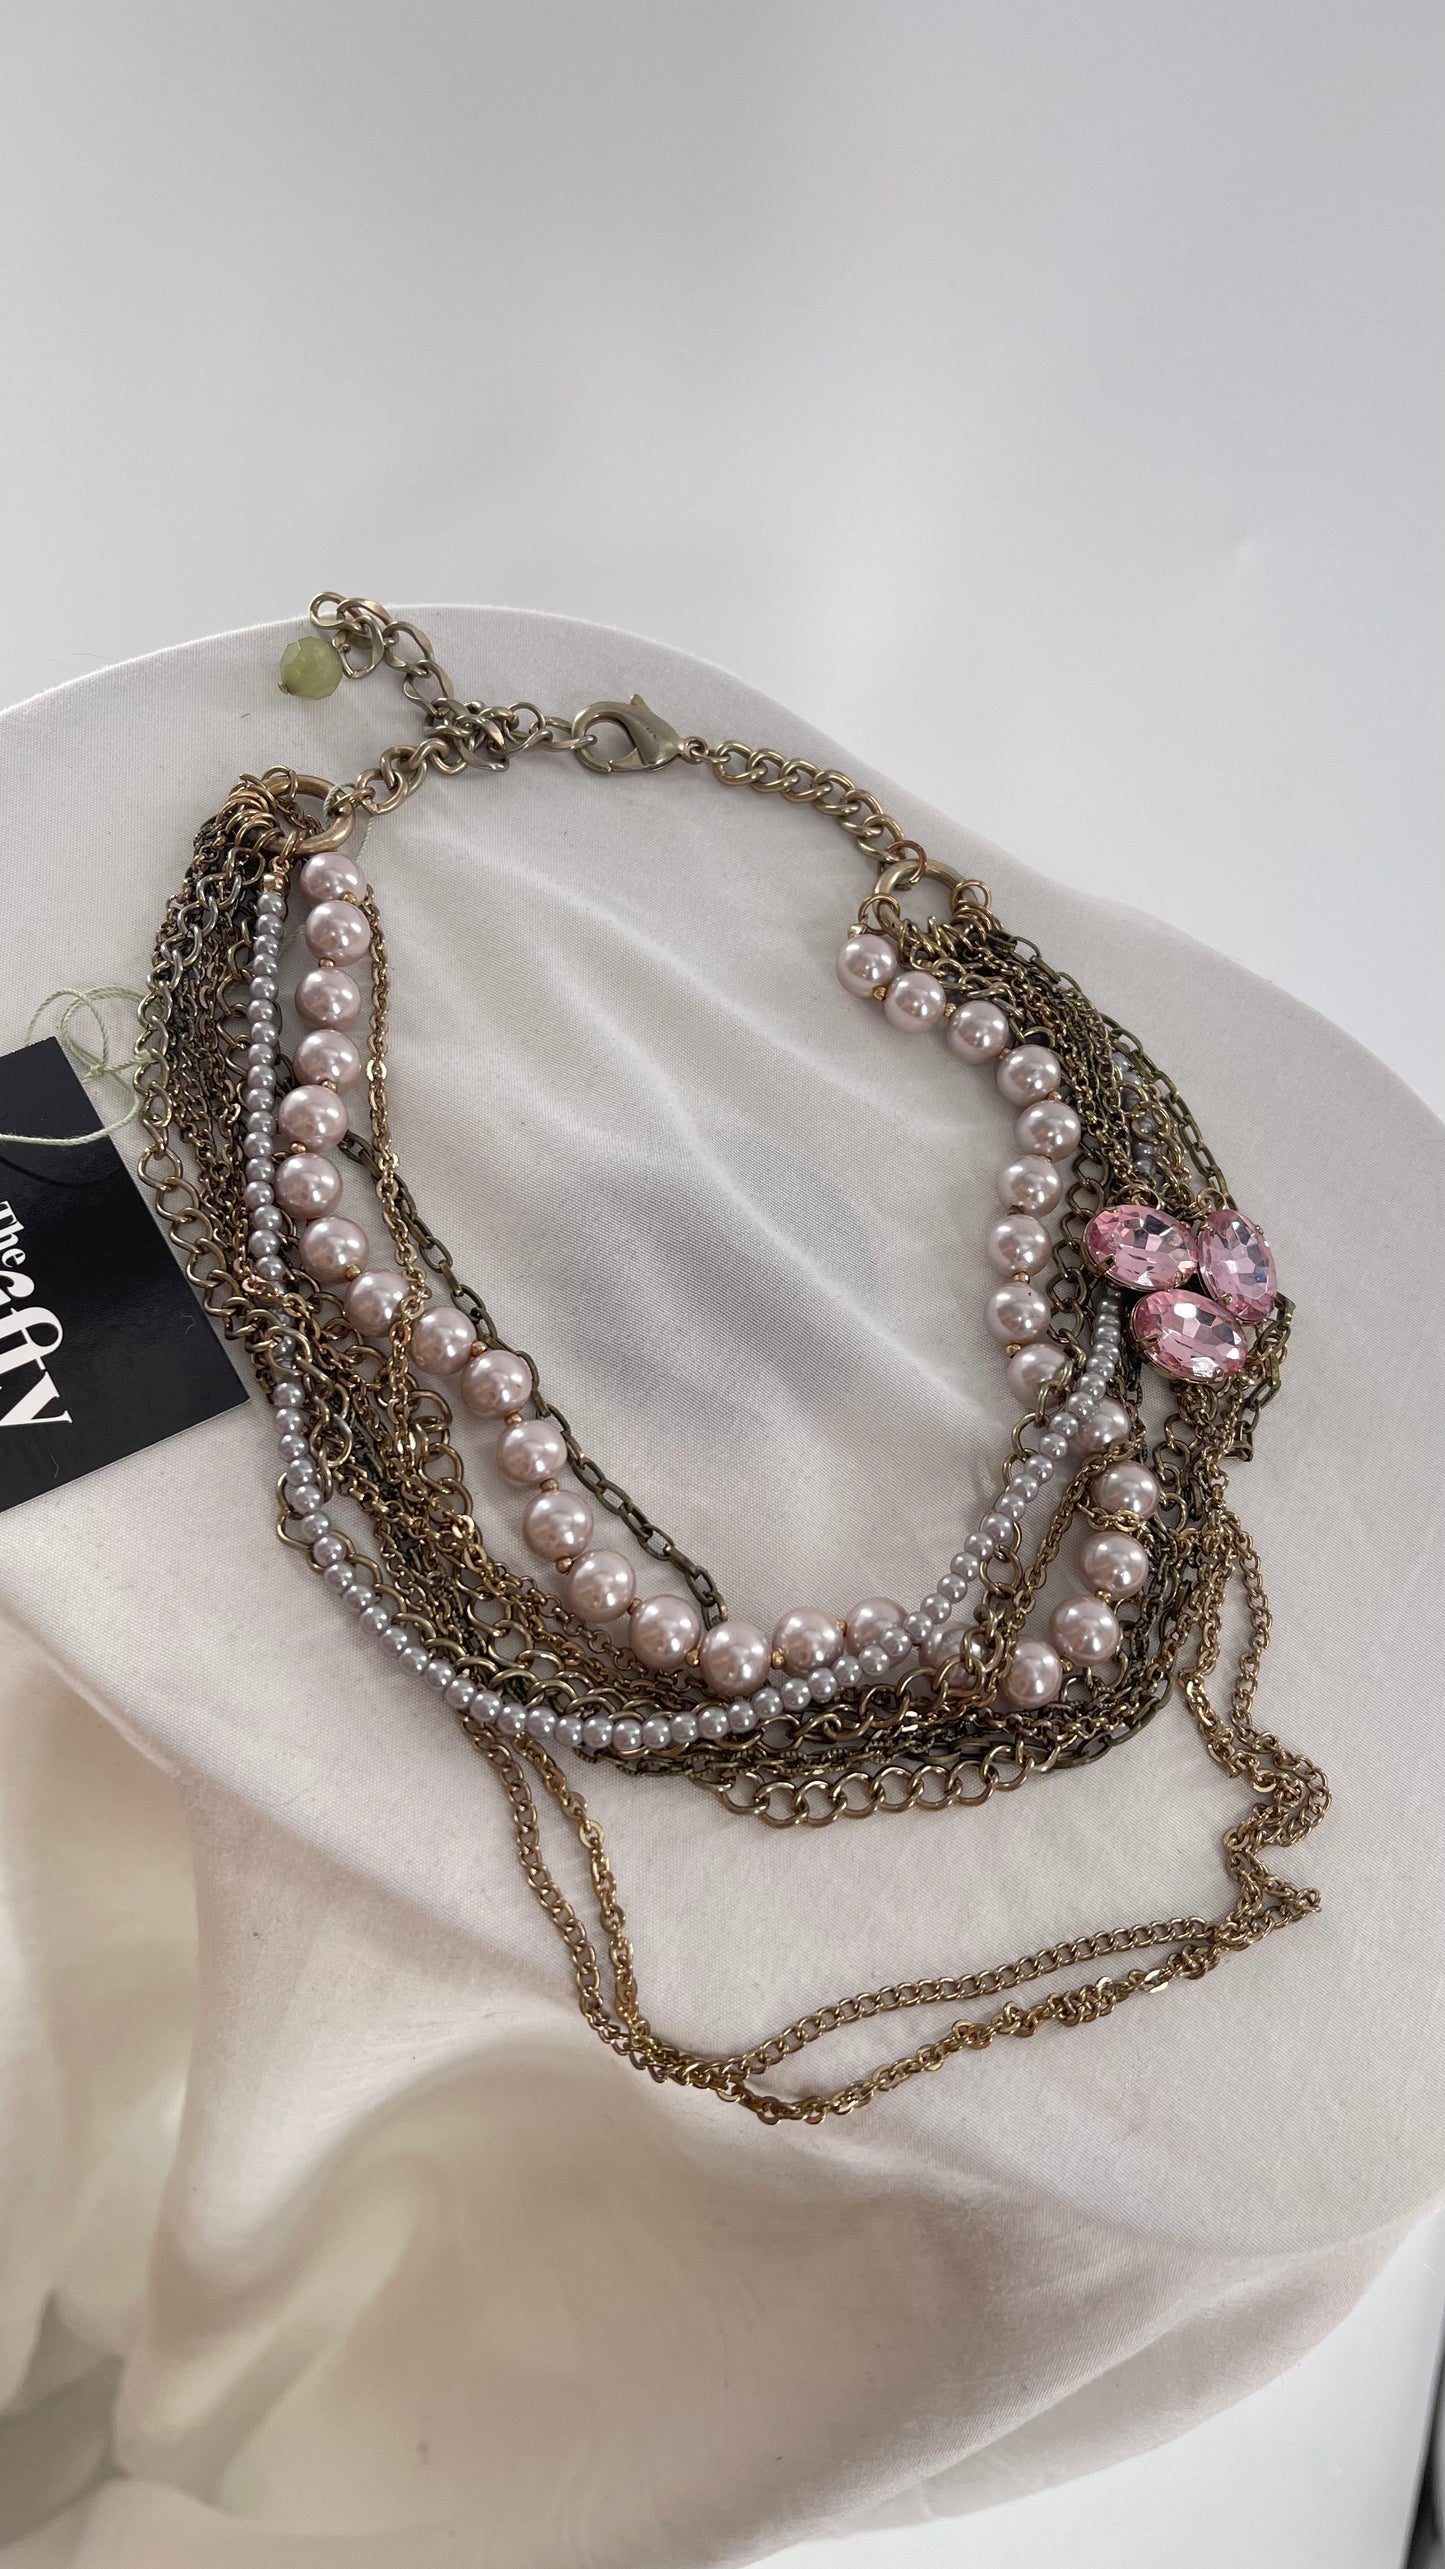 Anthropologie Multi Layered Chain and Pearls Choker Necklace